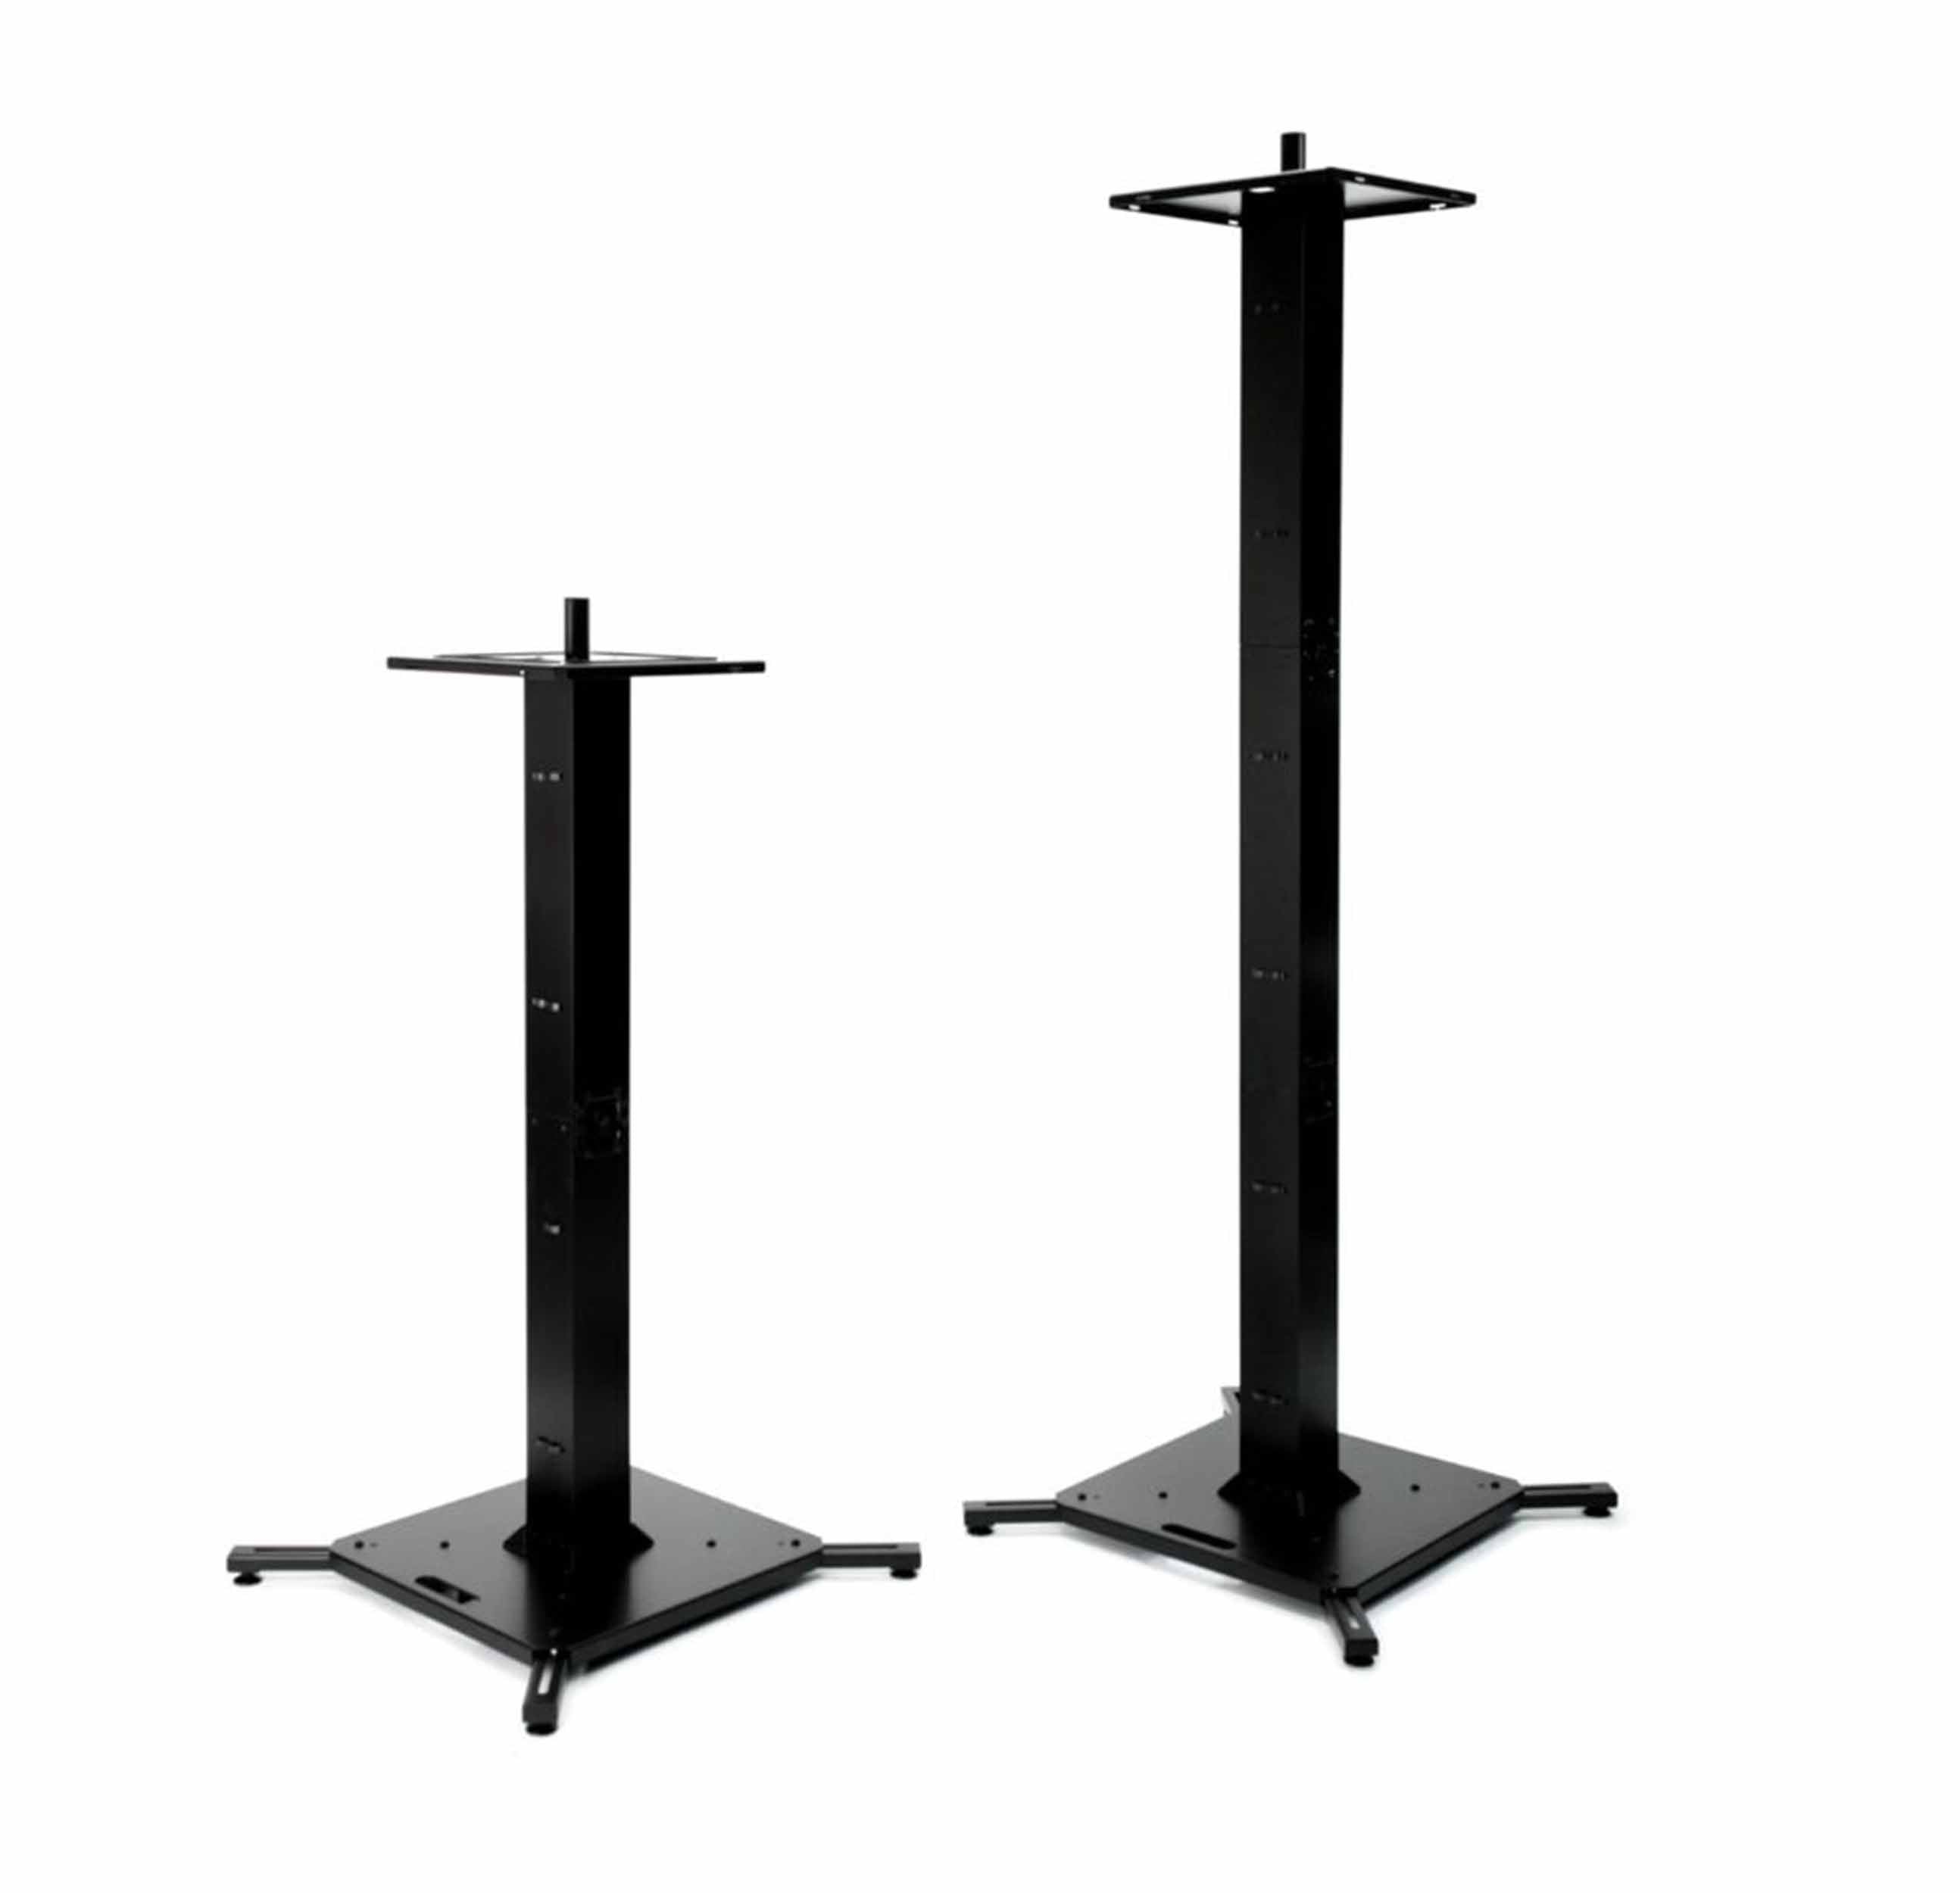 B-Stock: ProX XFH-MHSTANDX2BL Humpter Adjustable Lighting and DJ Stands with Carrying Bags - Pair of Black by ProX Cases